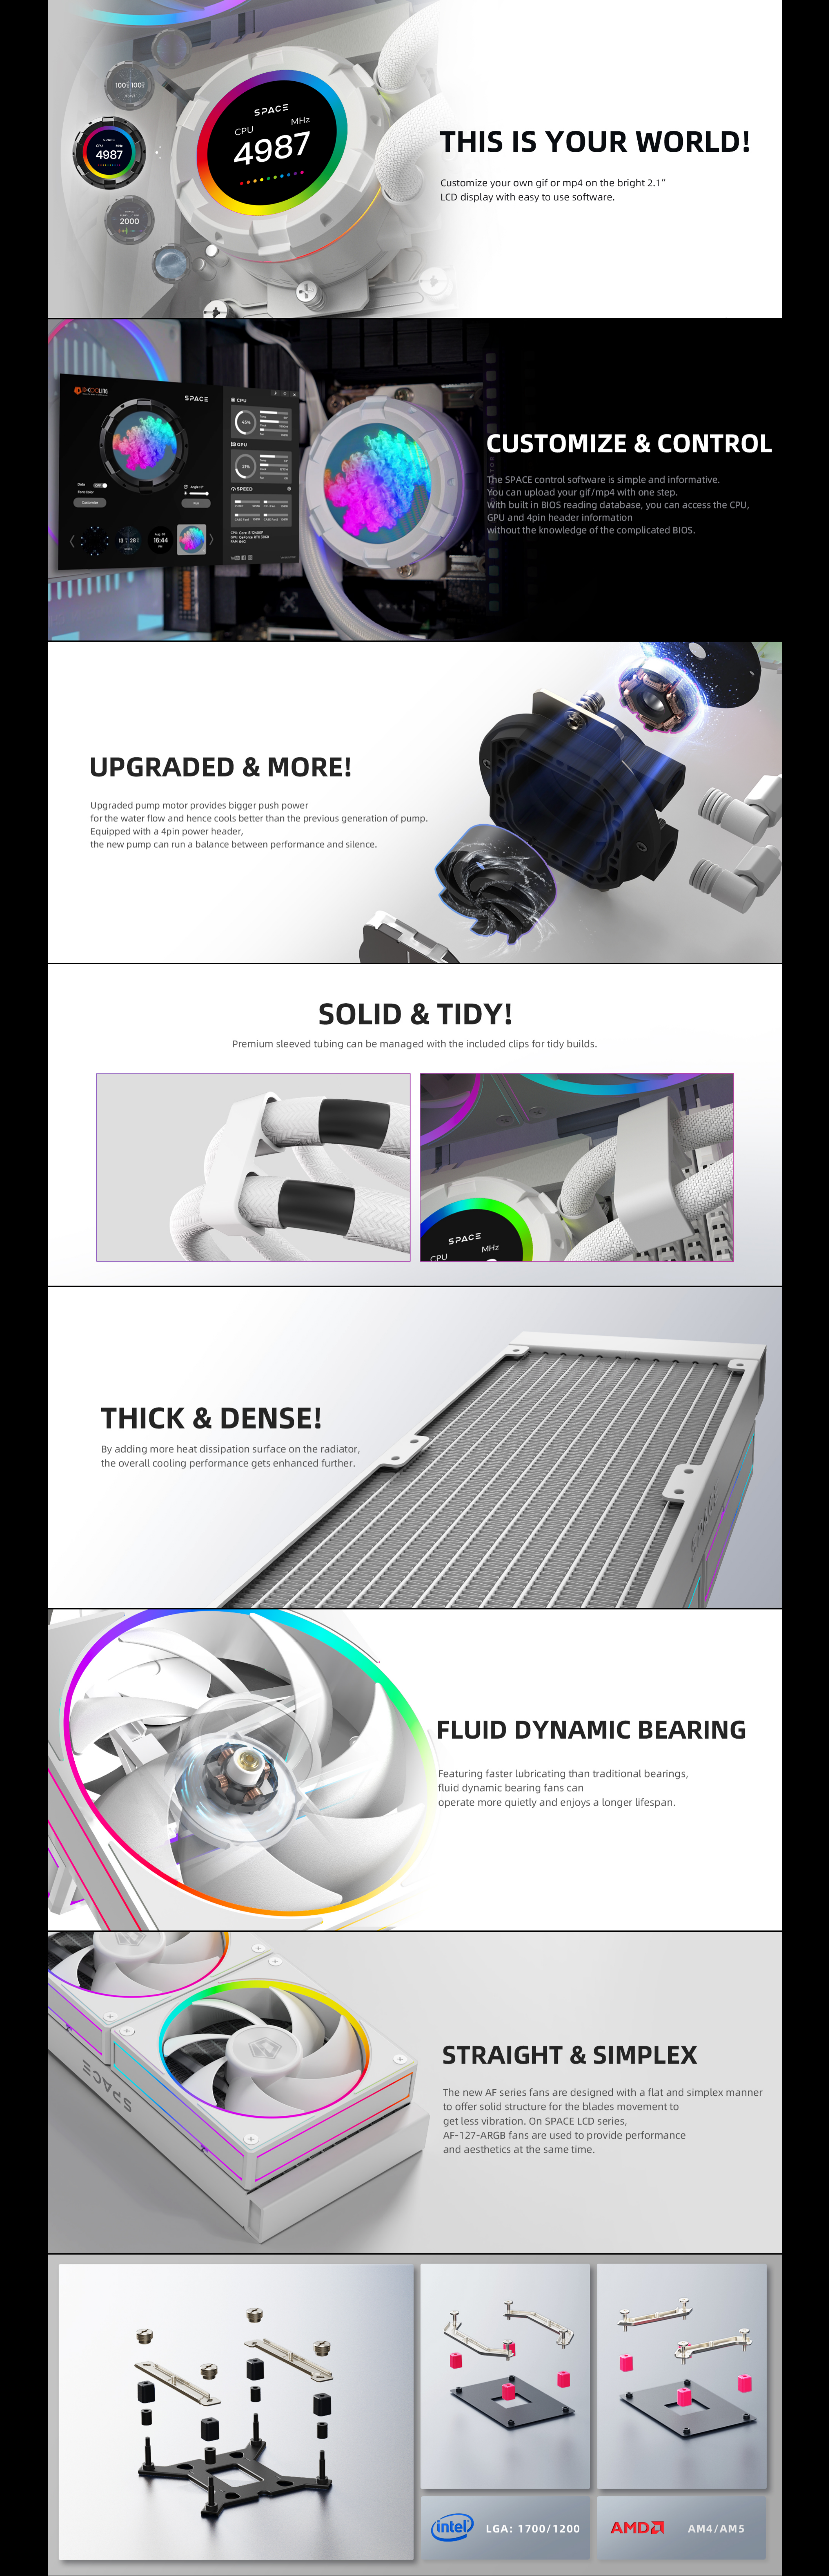 A large marketing image providing additional information about the product ID-COOLING Space LCD 360mm AIO CPU Liquid Cooler - White - Additional alt info not provided